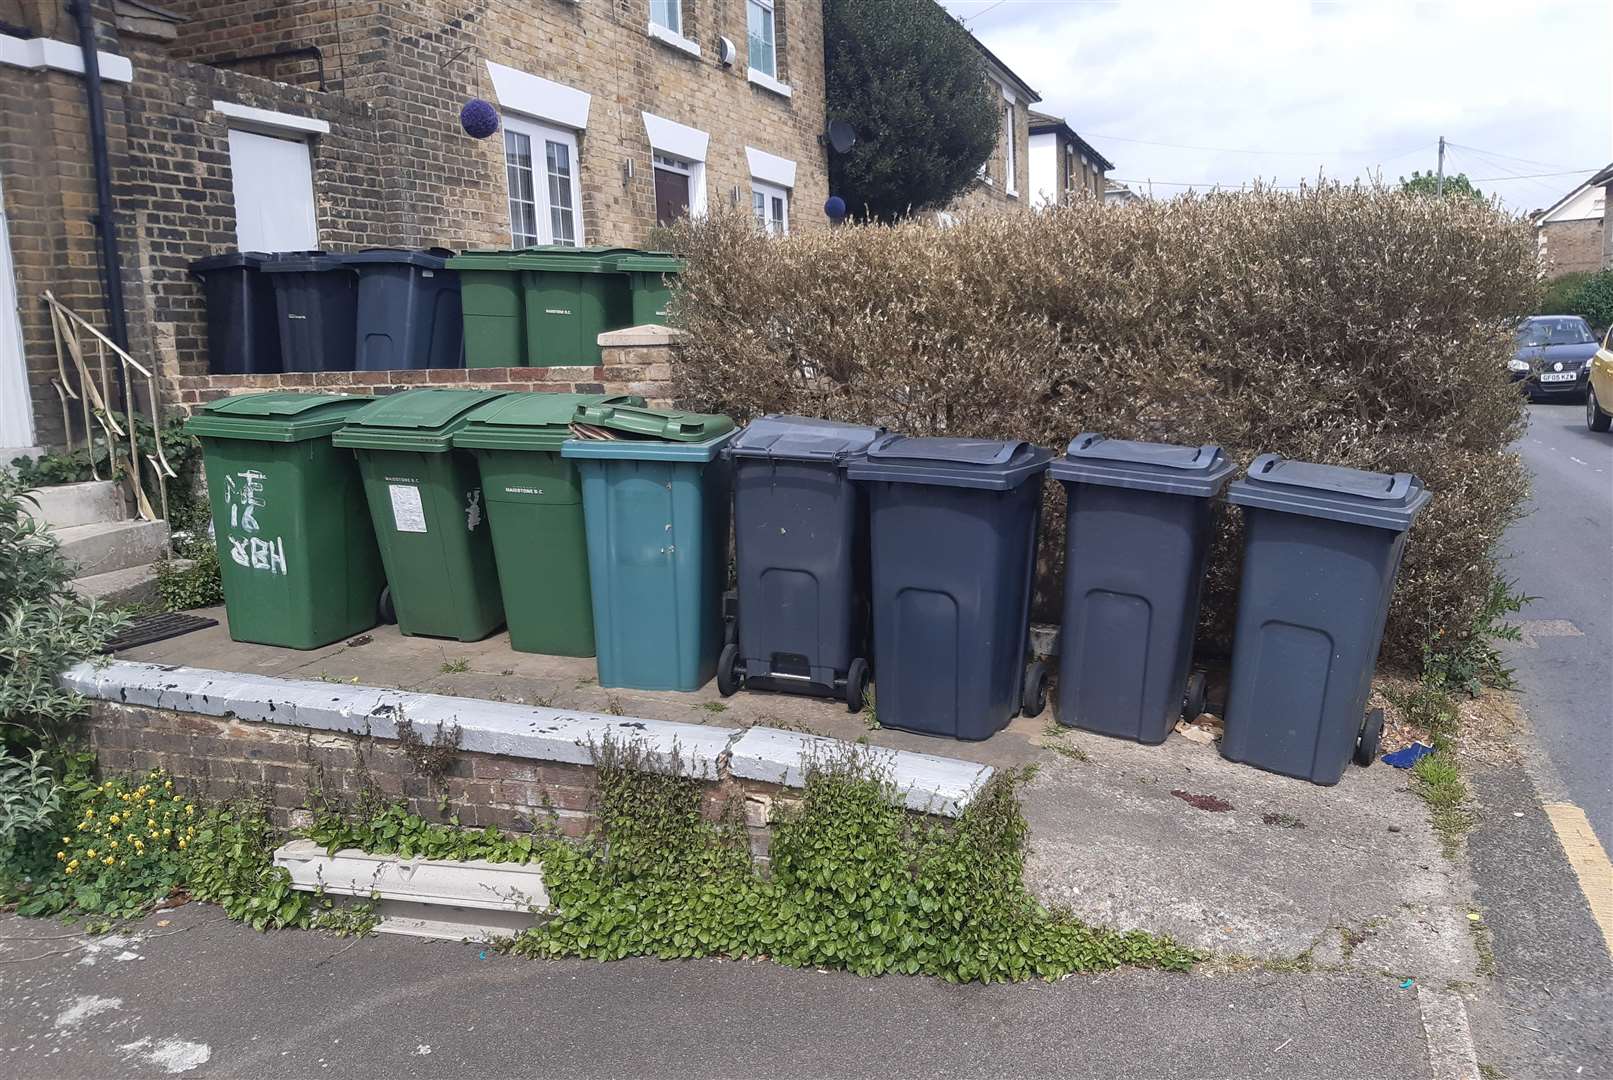 There are bins galore in the street